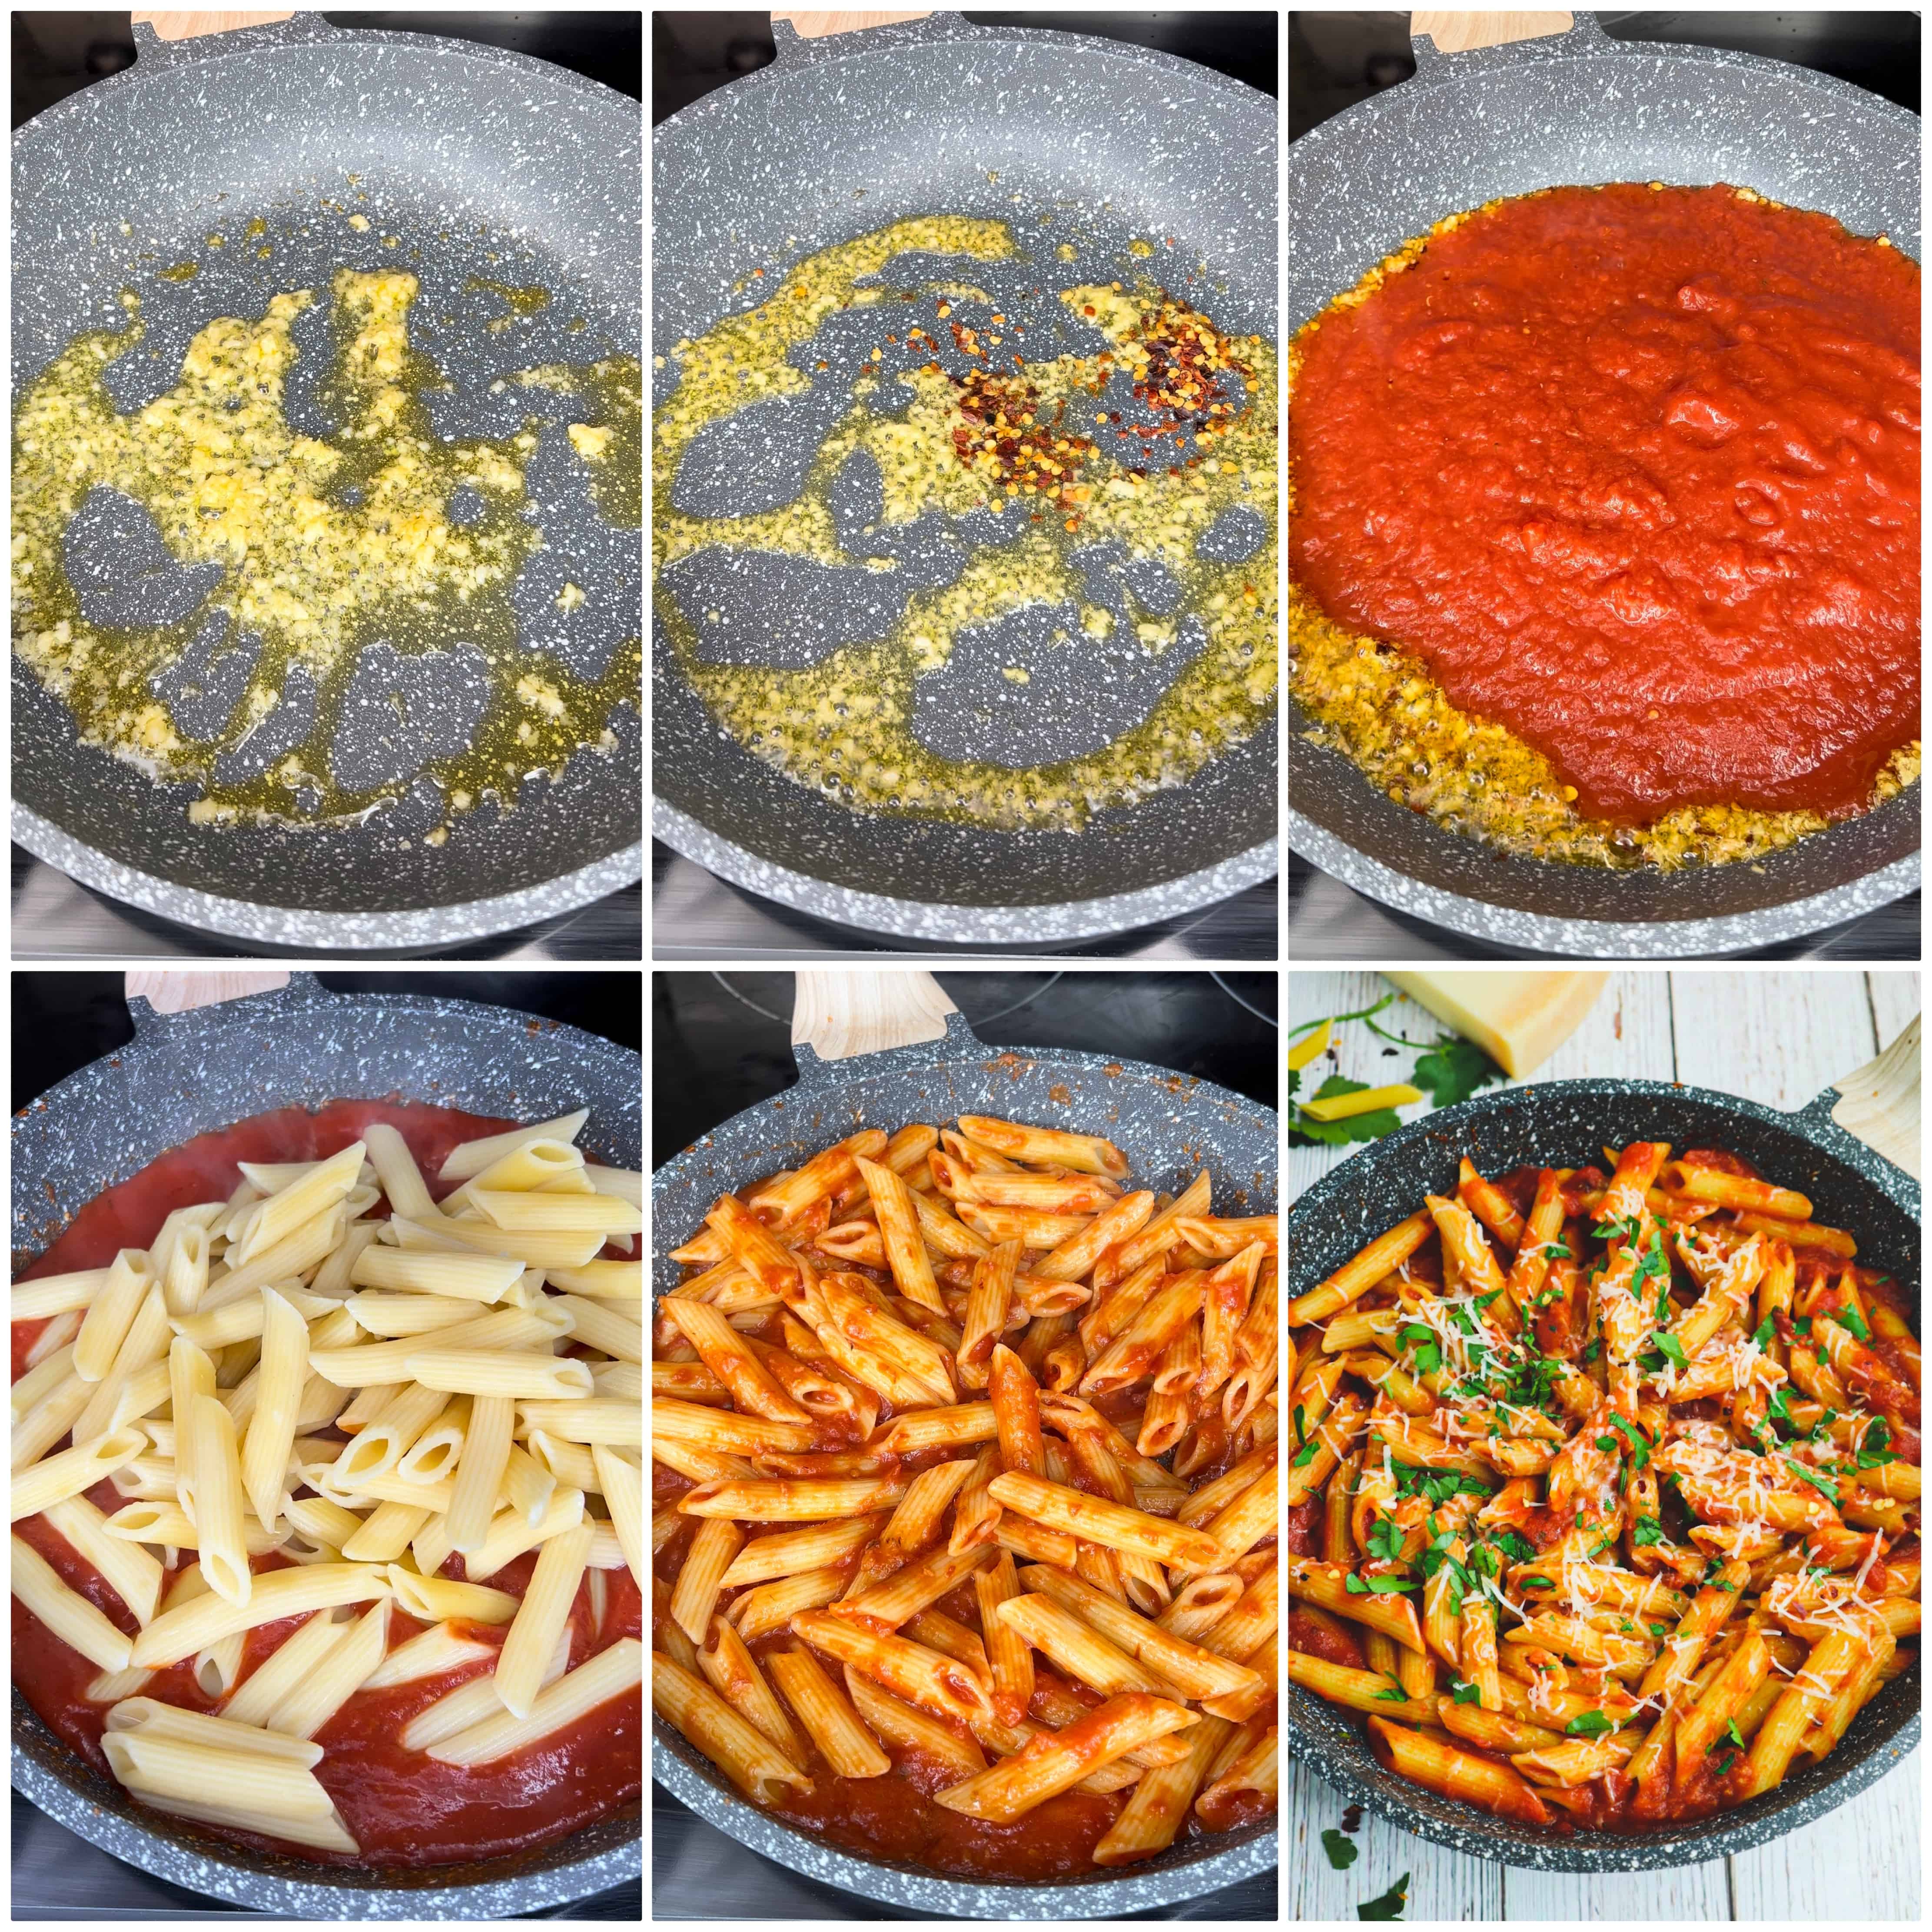 steps of how cook the pasta